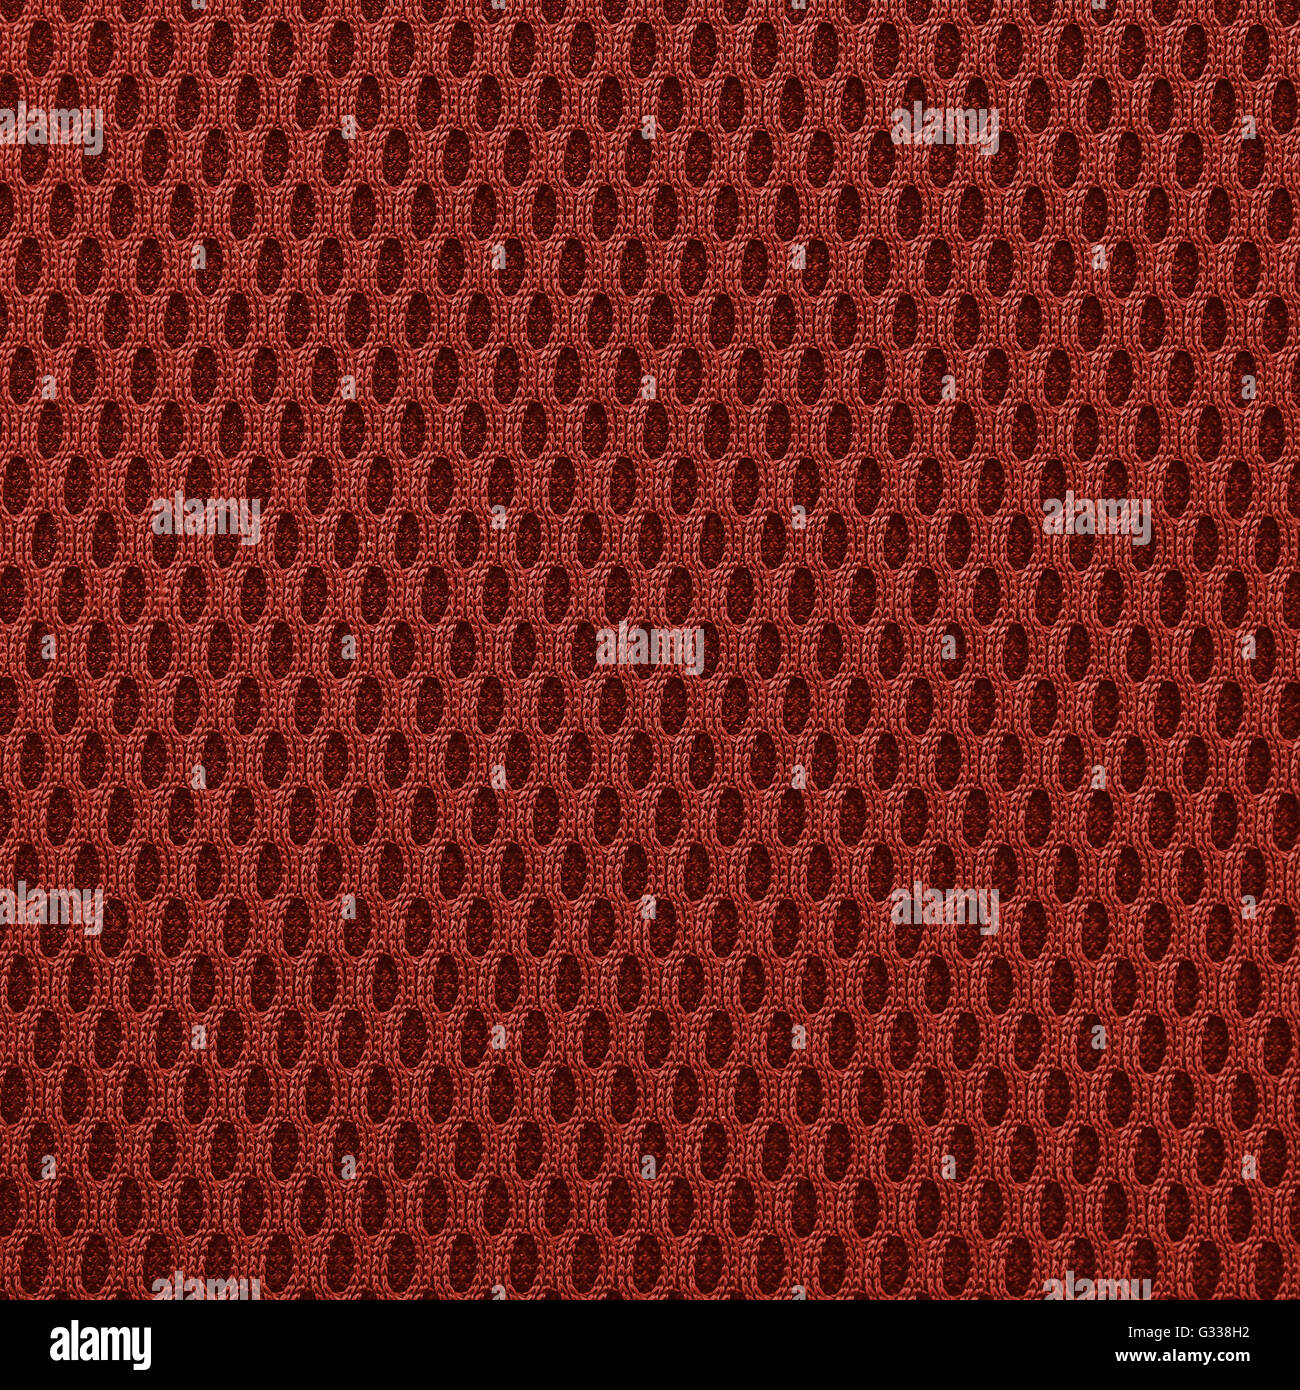 Tomato red multilayer fiber fabric texture. Close up, top view. Stock Photo